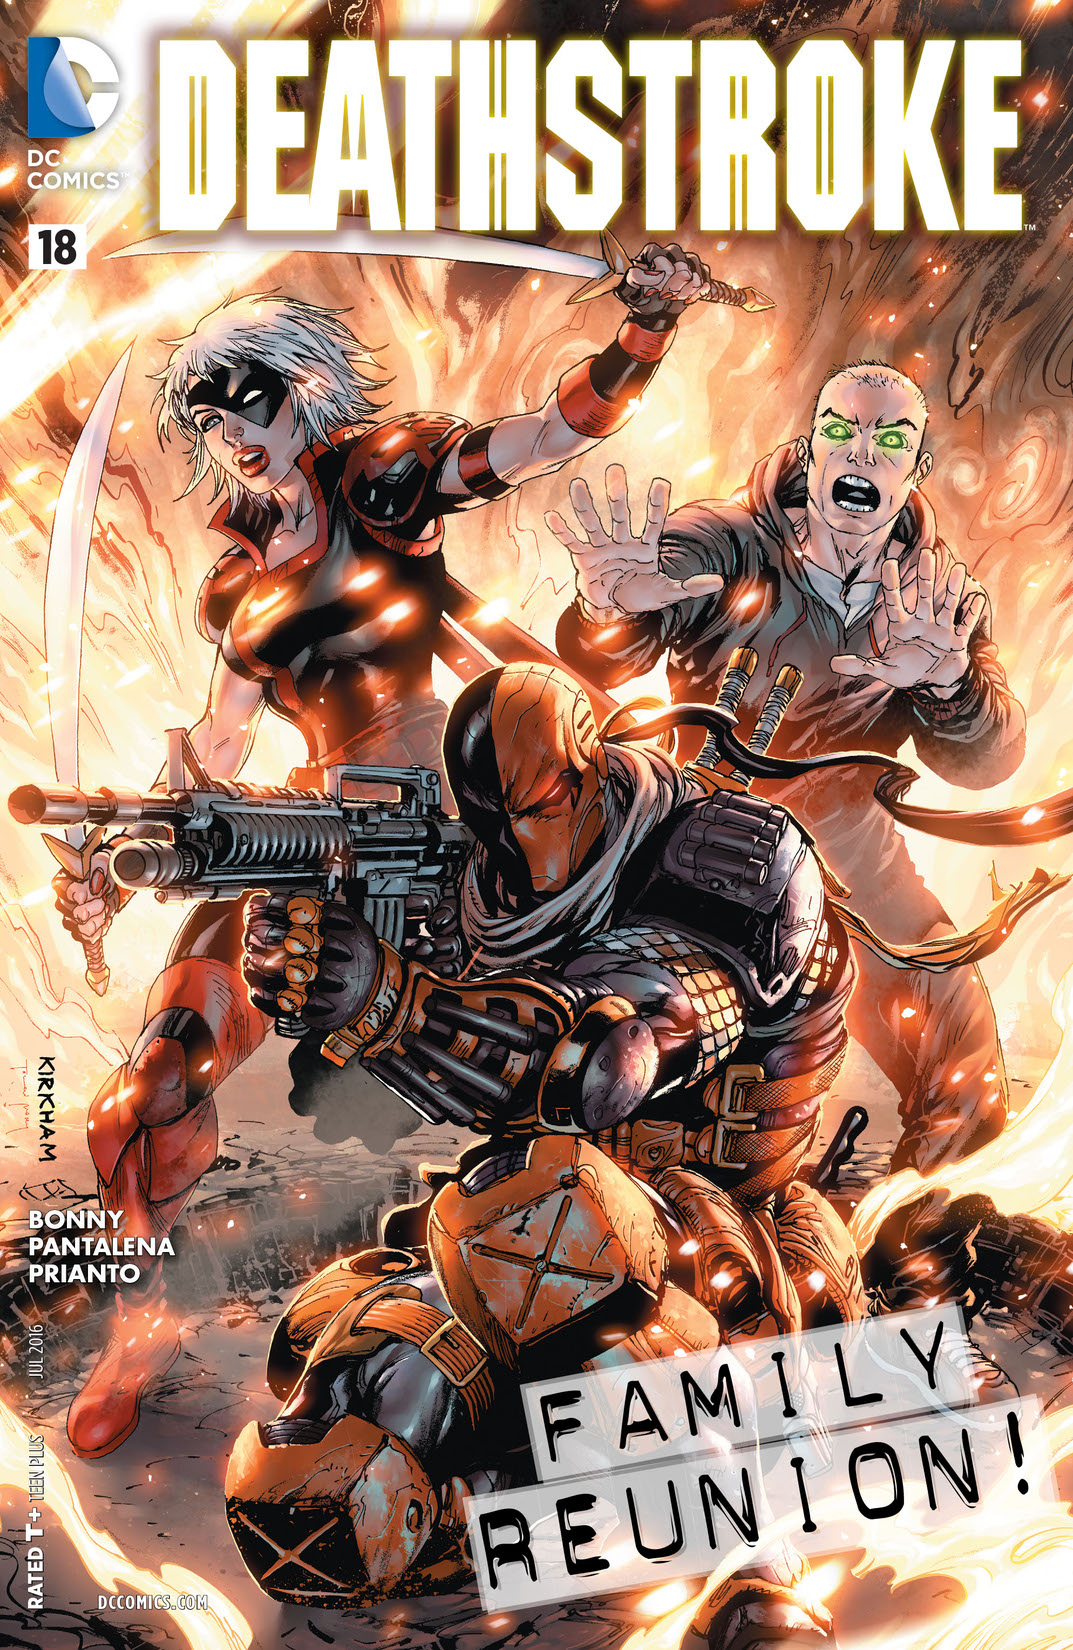 Deathstroke (2014-) #18 preview images